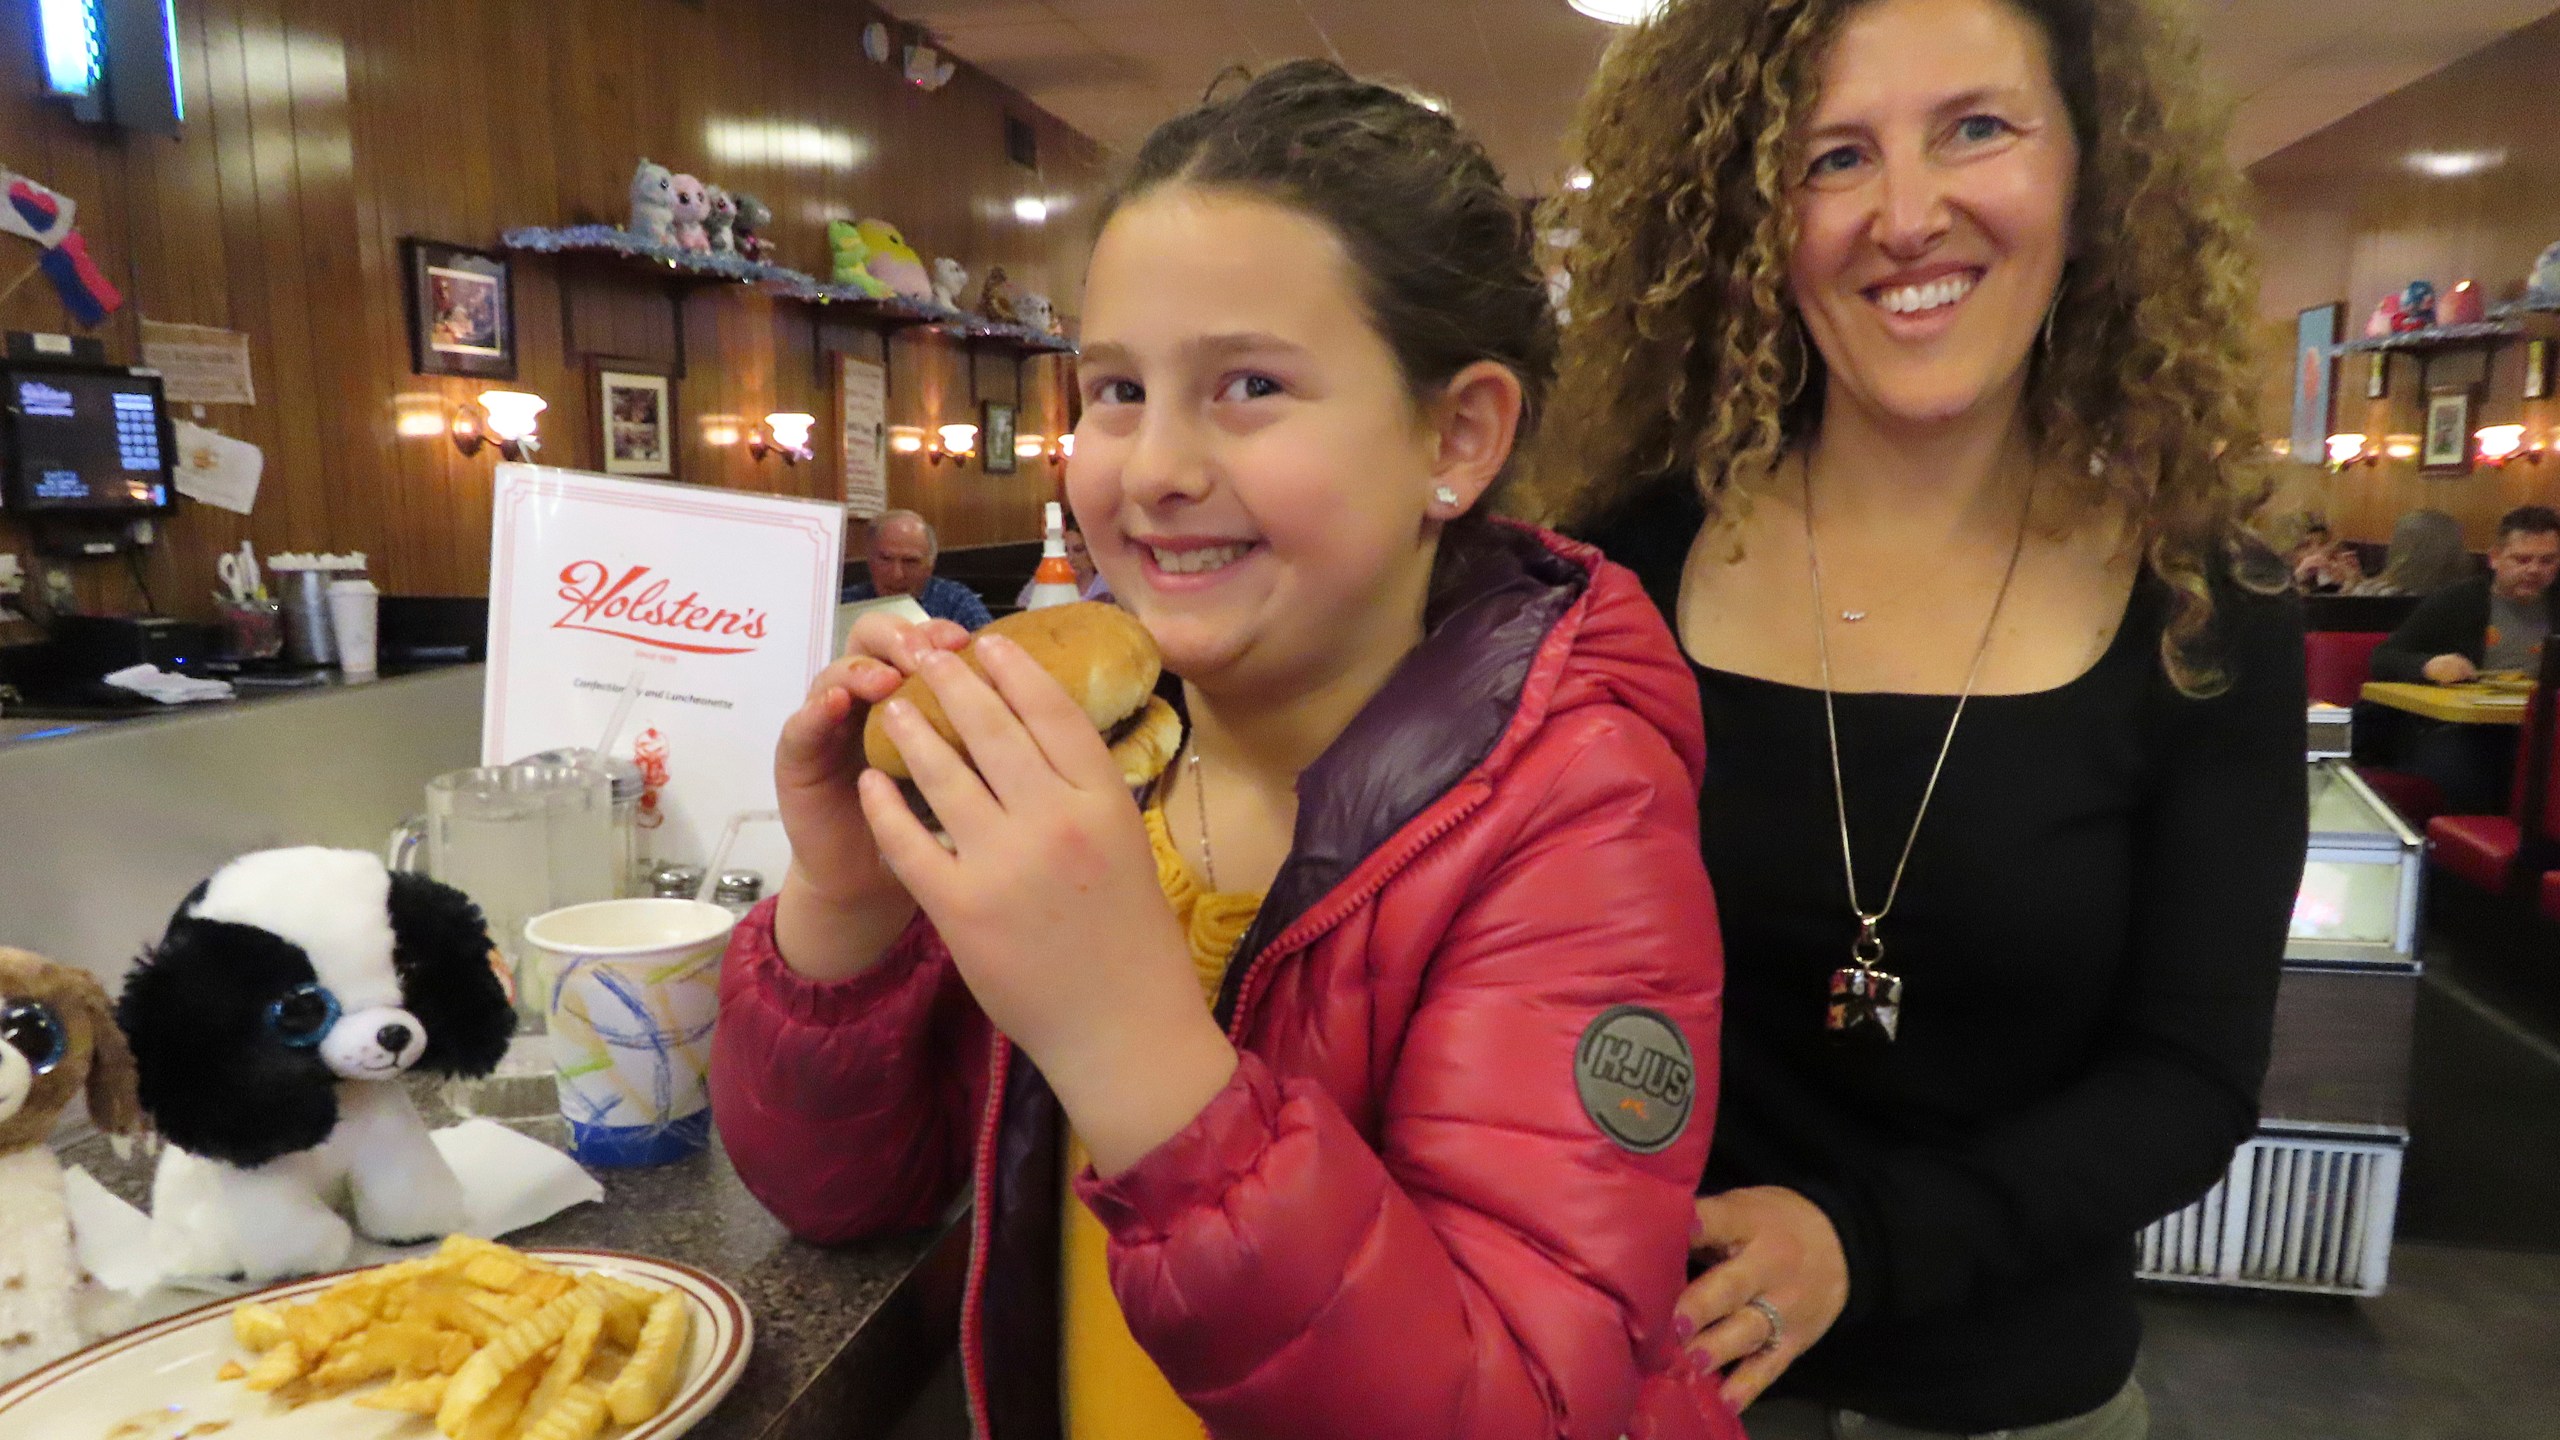 Evie Polera, left, and her mother Dara Polera, right, eat on March 5, 2024, at the counter of Holsten's, the Bloomfield N.J. ice cream parlor and restaurant where the final scene of "The Sopranos" TV series was filmed. A day earlier, the booth where Tony Soprano may or may not have met his end was sold in an online auction for $82,600 to a buyer that wishes to remain anonymous. (AP Photo/Wayne Parry)